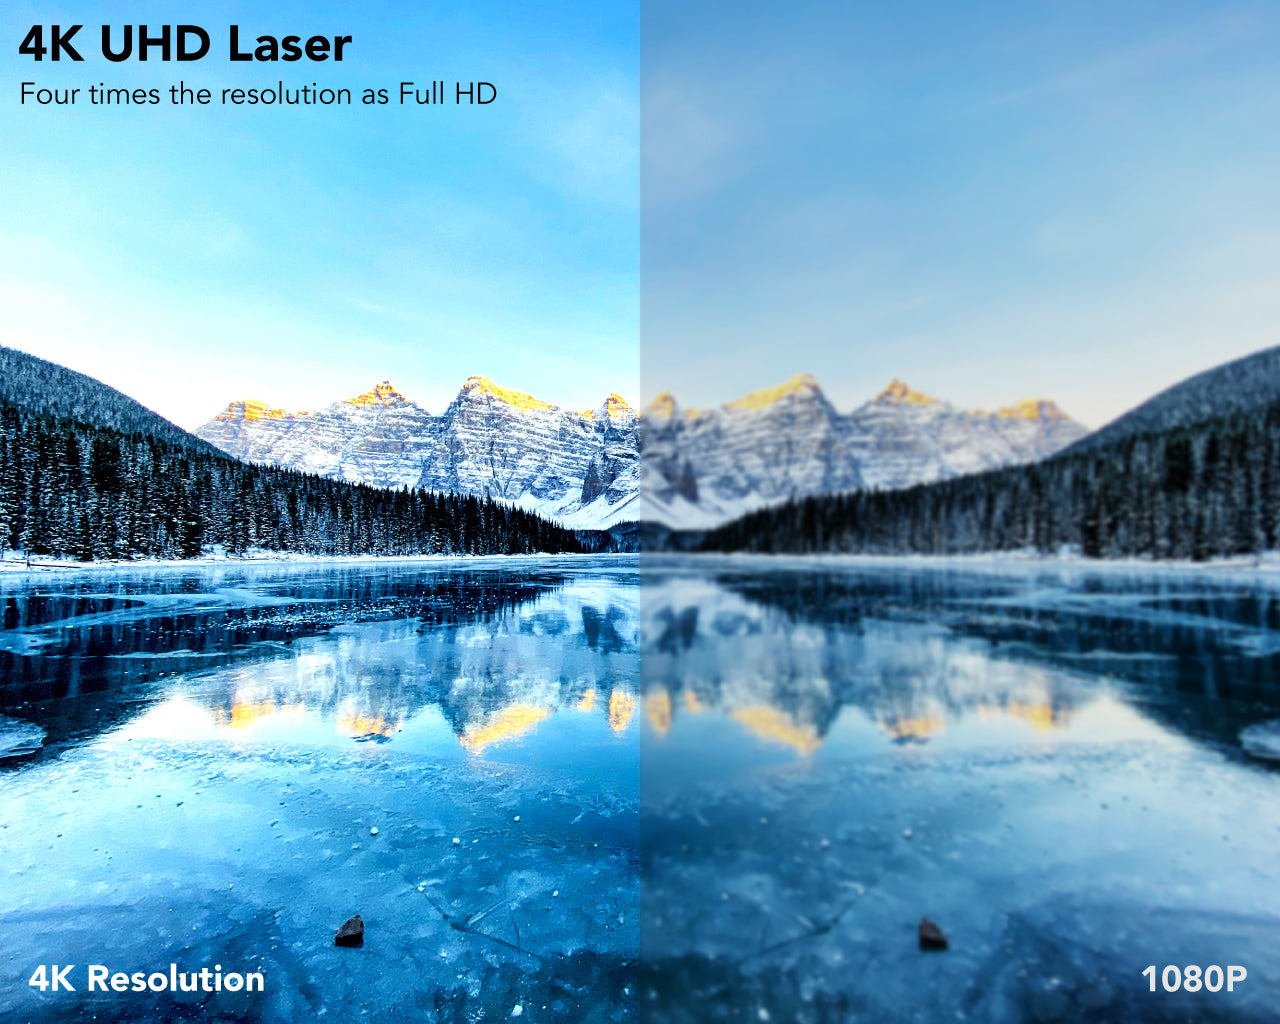 UHD vs HD: Which is Better